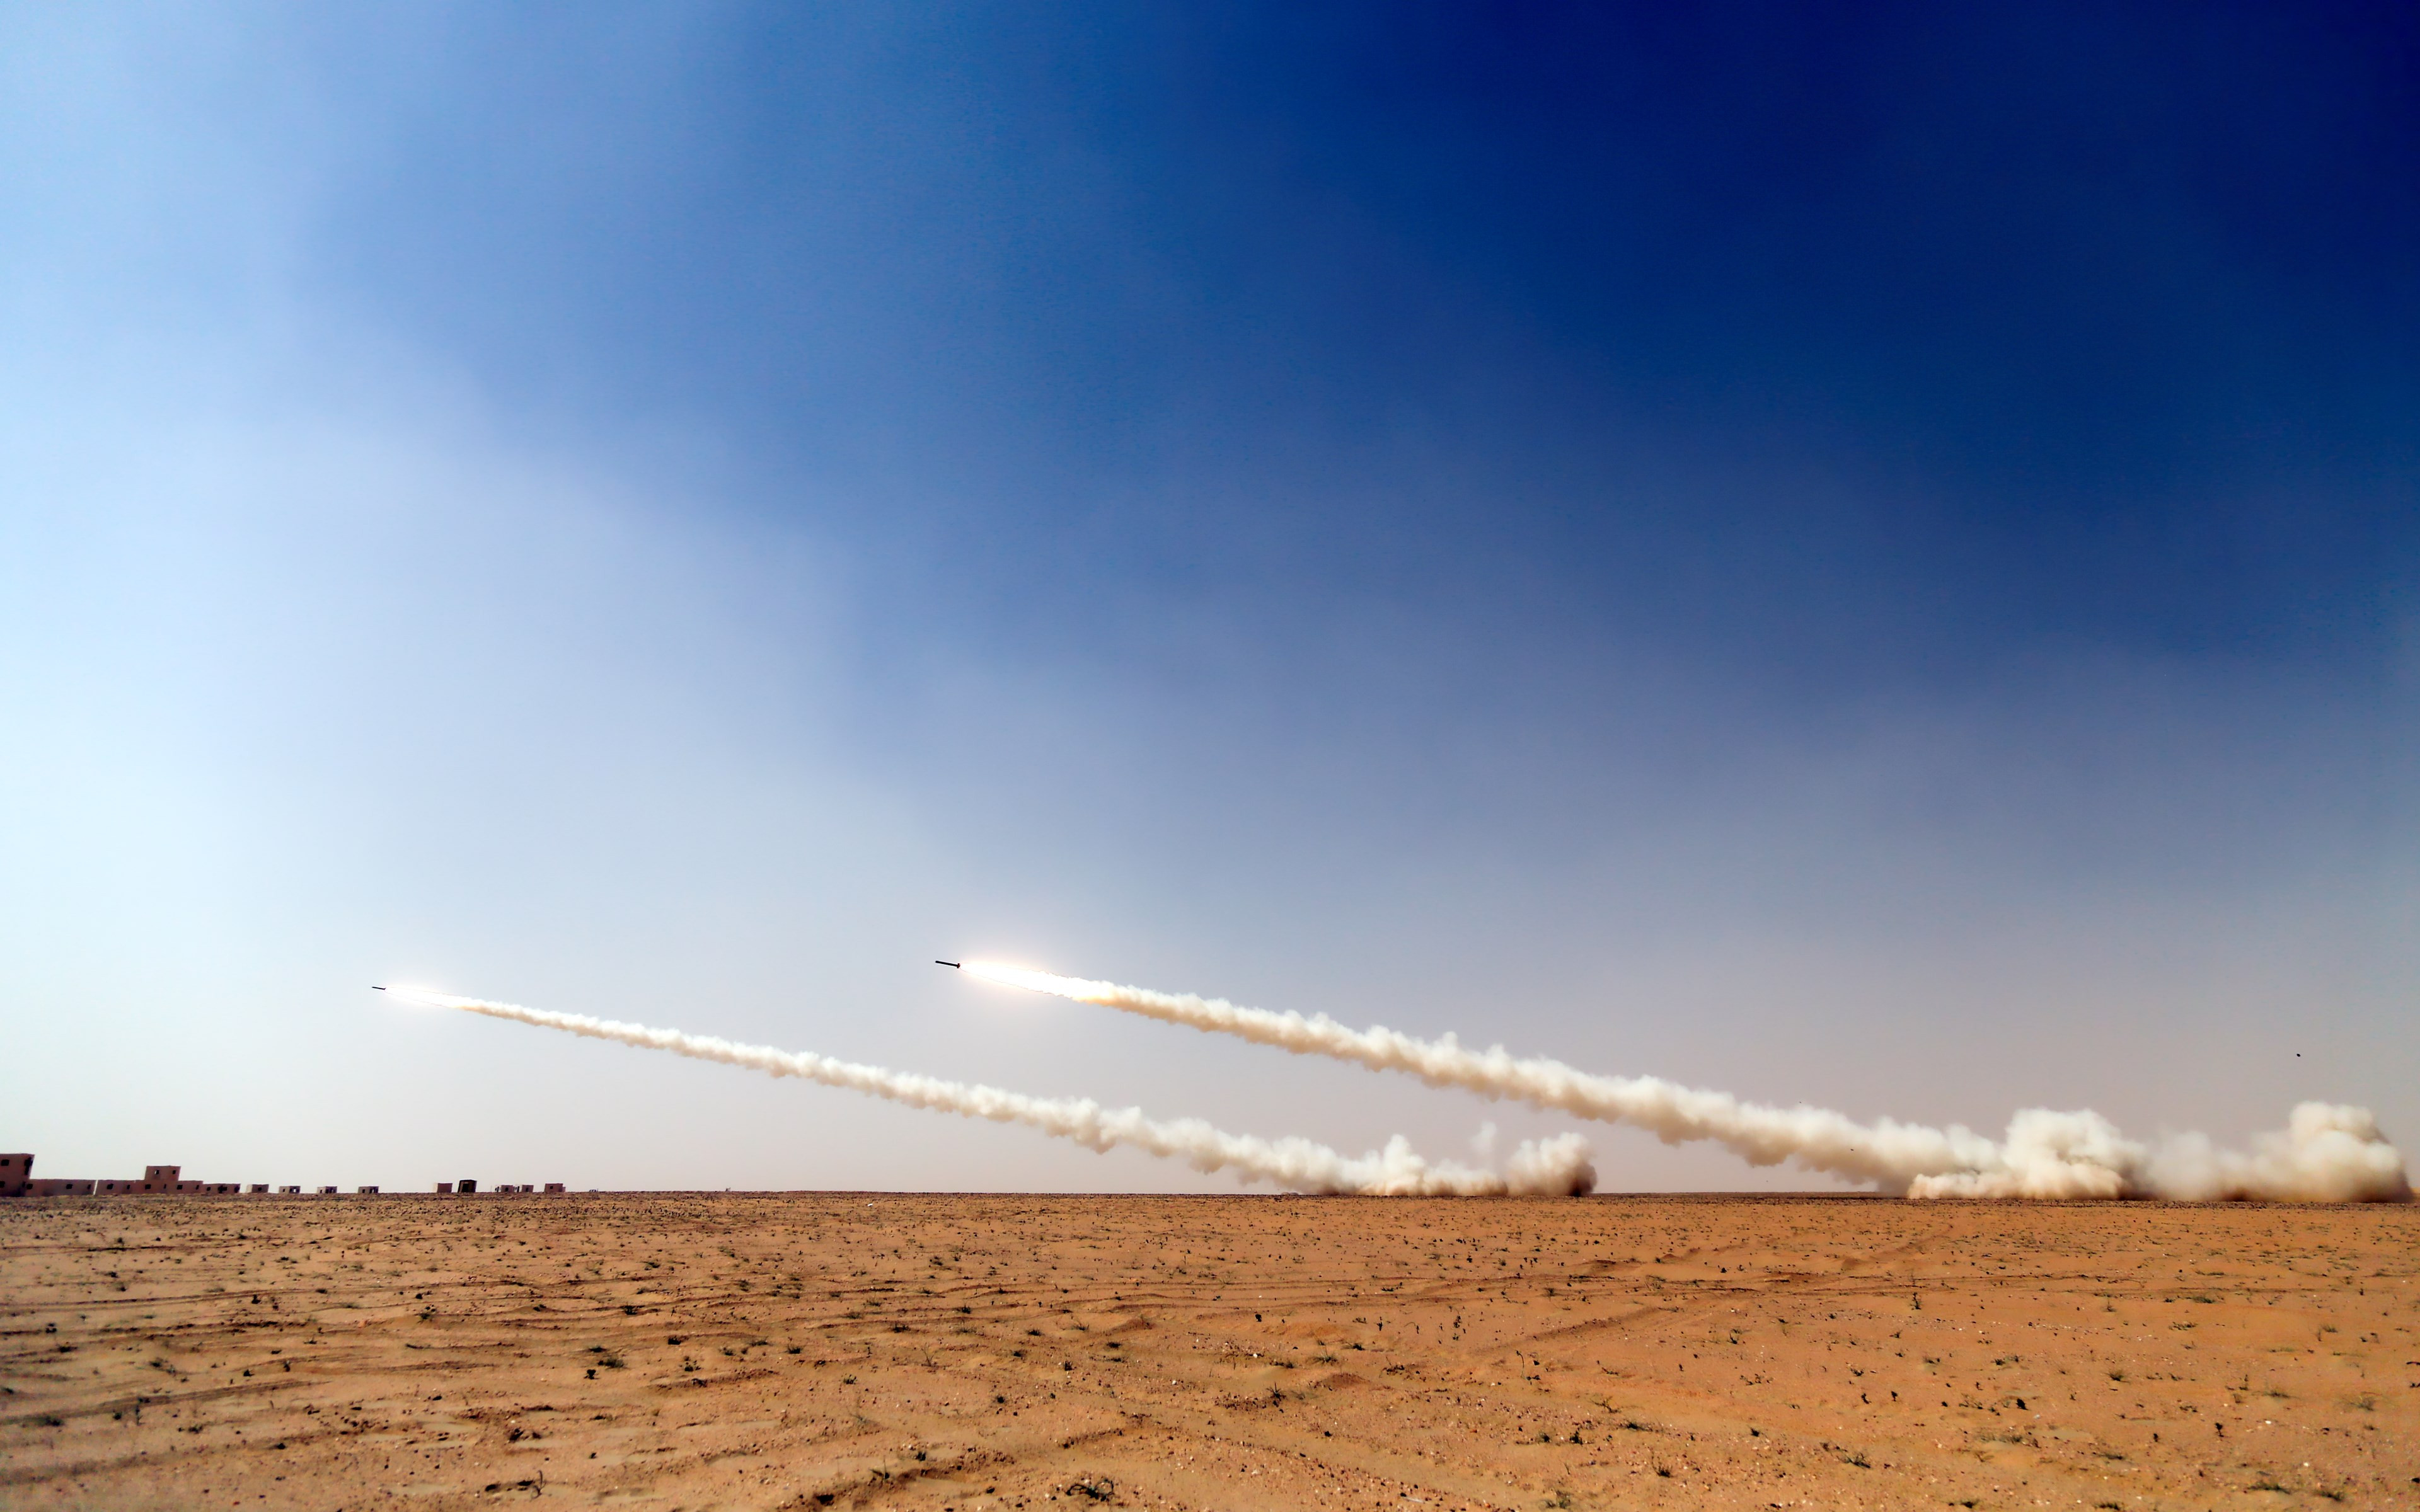 Military rockets on the sky wallpaper 3840x2400